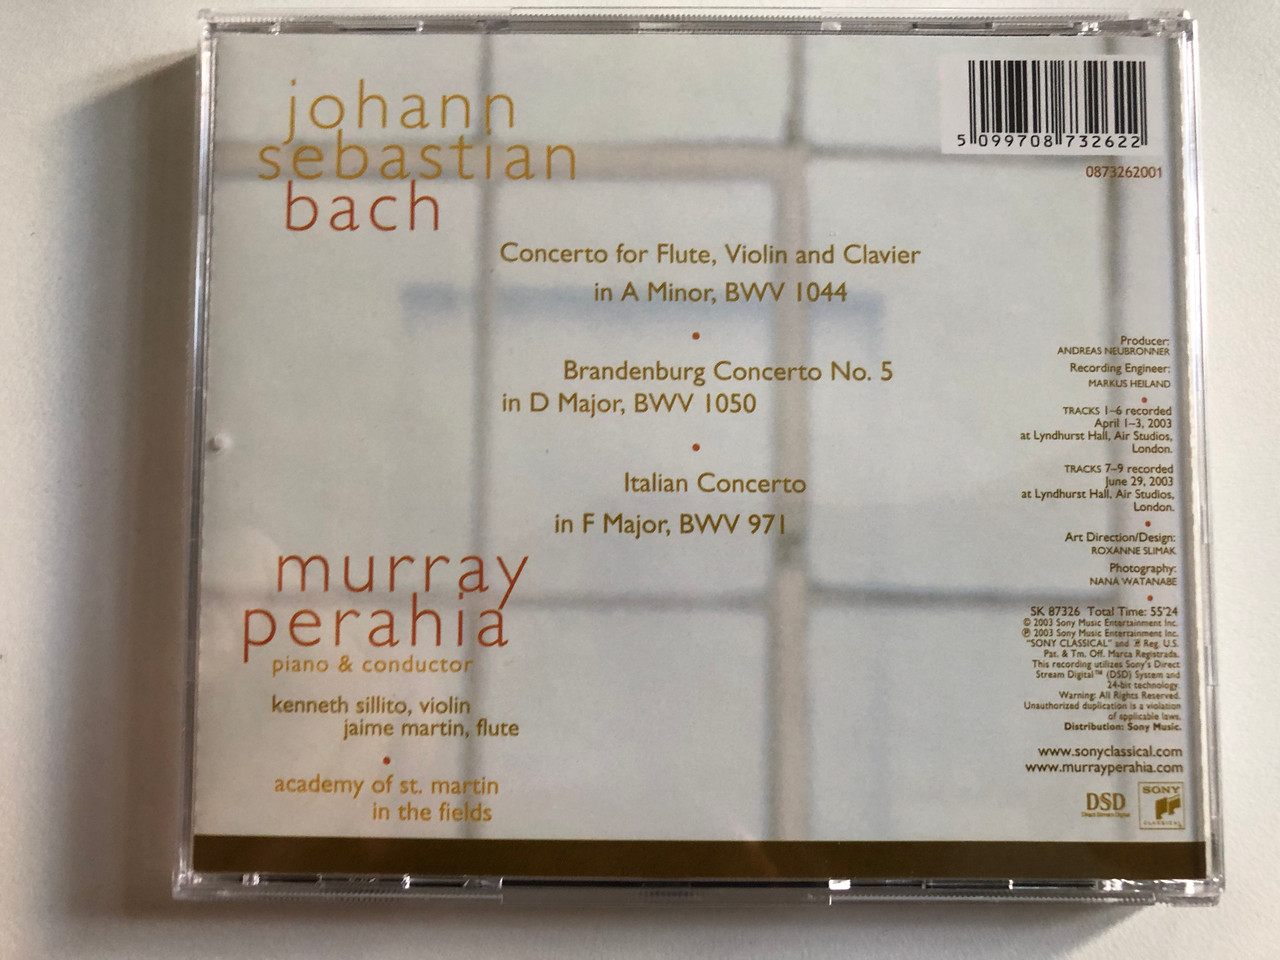 https://cdn10.bigcommerce.com/s-62bdpkt7pb/products/0/images/313481/Murray_Perahia_Plays_Bach_-_Italian_Concerto_Brandenburg_Concerto_No._5_Concerto_For_Flute_Violin_Piano_Jaime_Martin_flute_Kenneth_Sillito_violin_Academy_Of_St._Martin_In_The___85963.1700843559.1280.1280.JPG?c=2